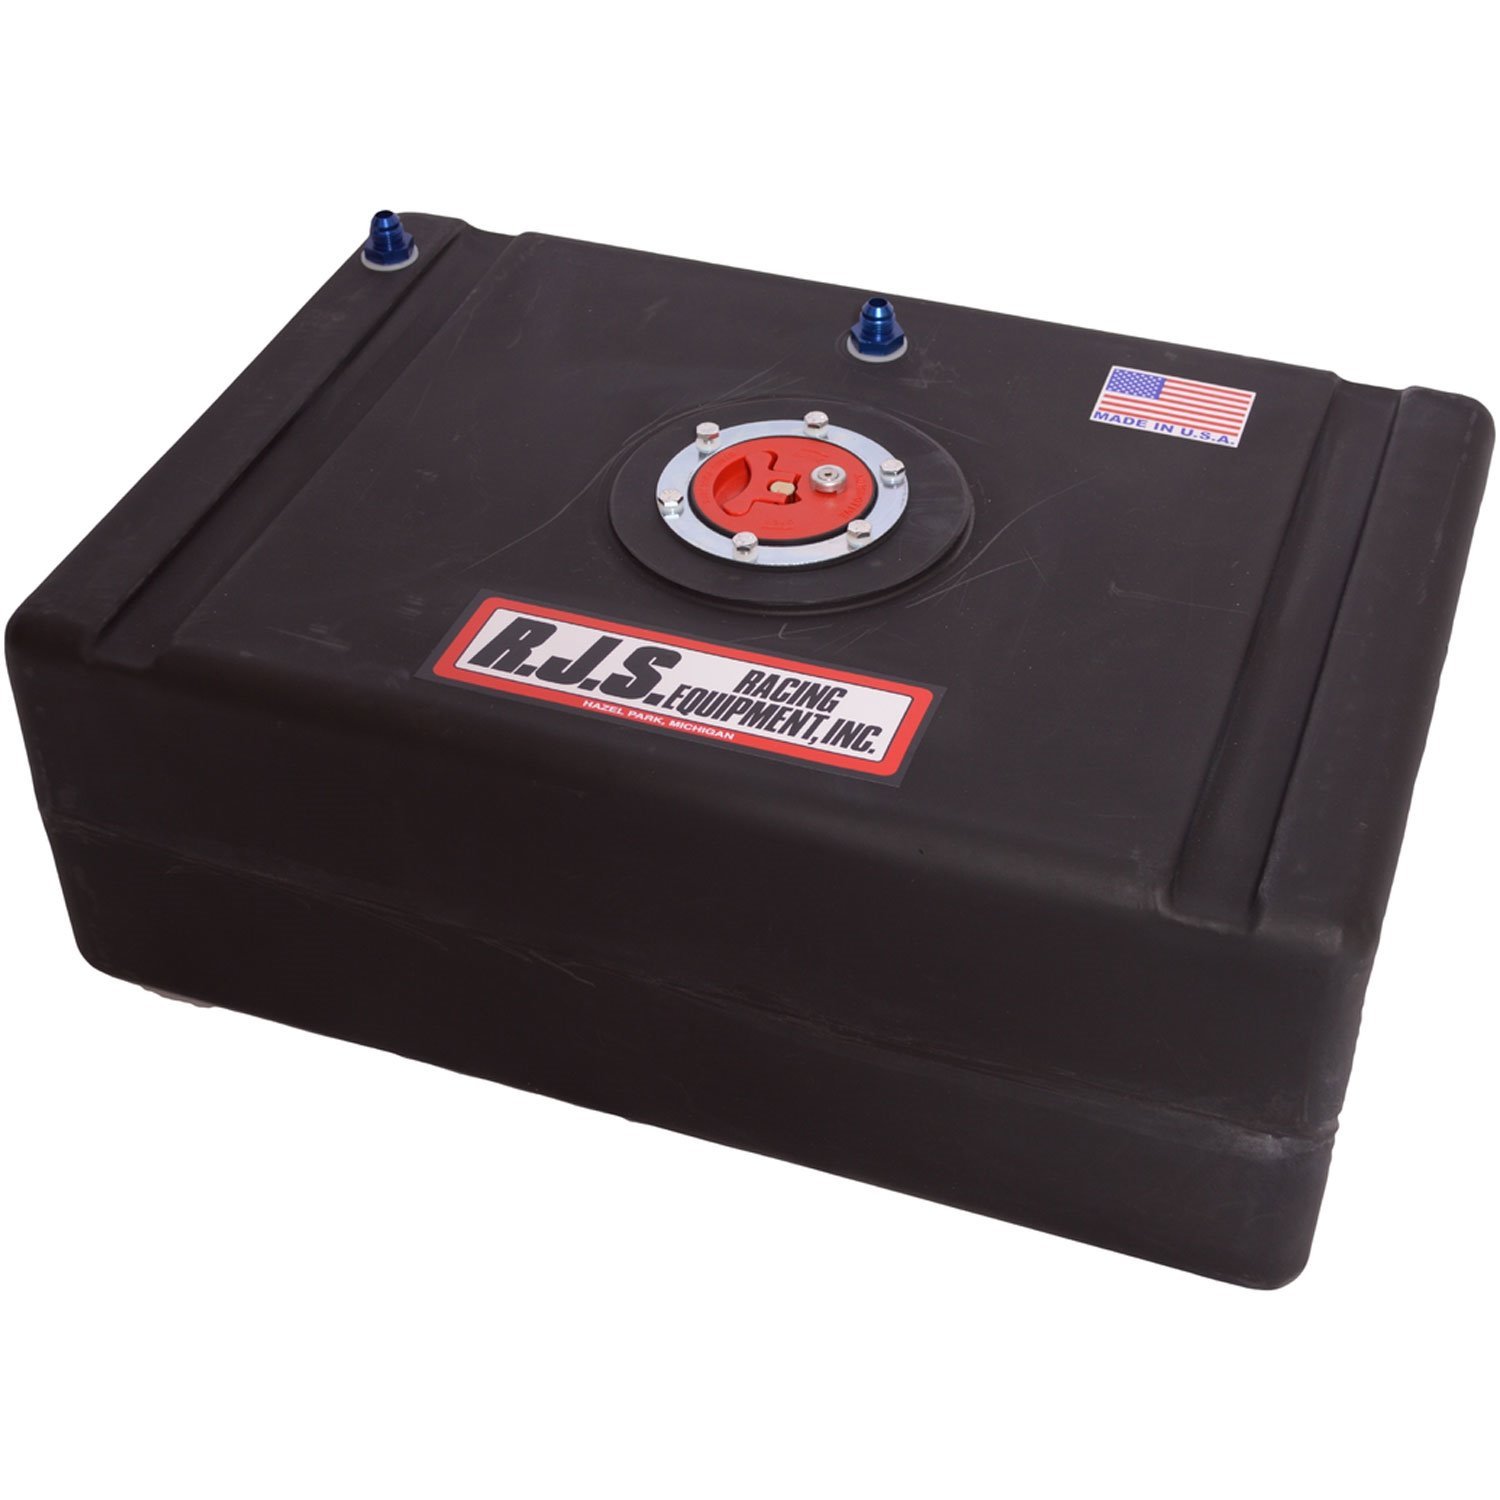 15 Gallon Economy Fuel Cell with Metal D-ring